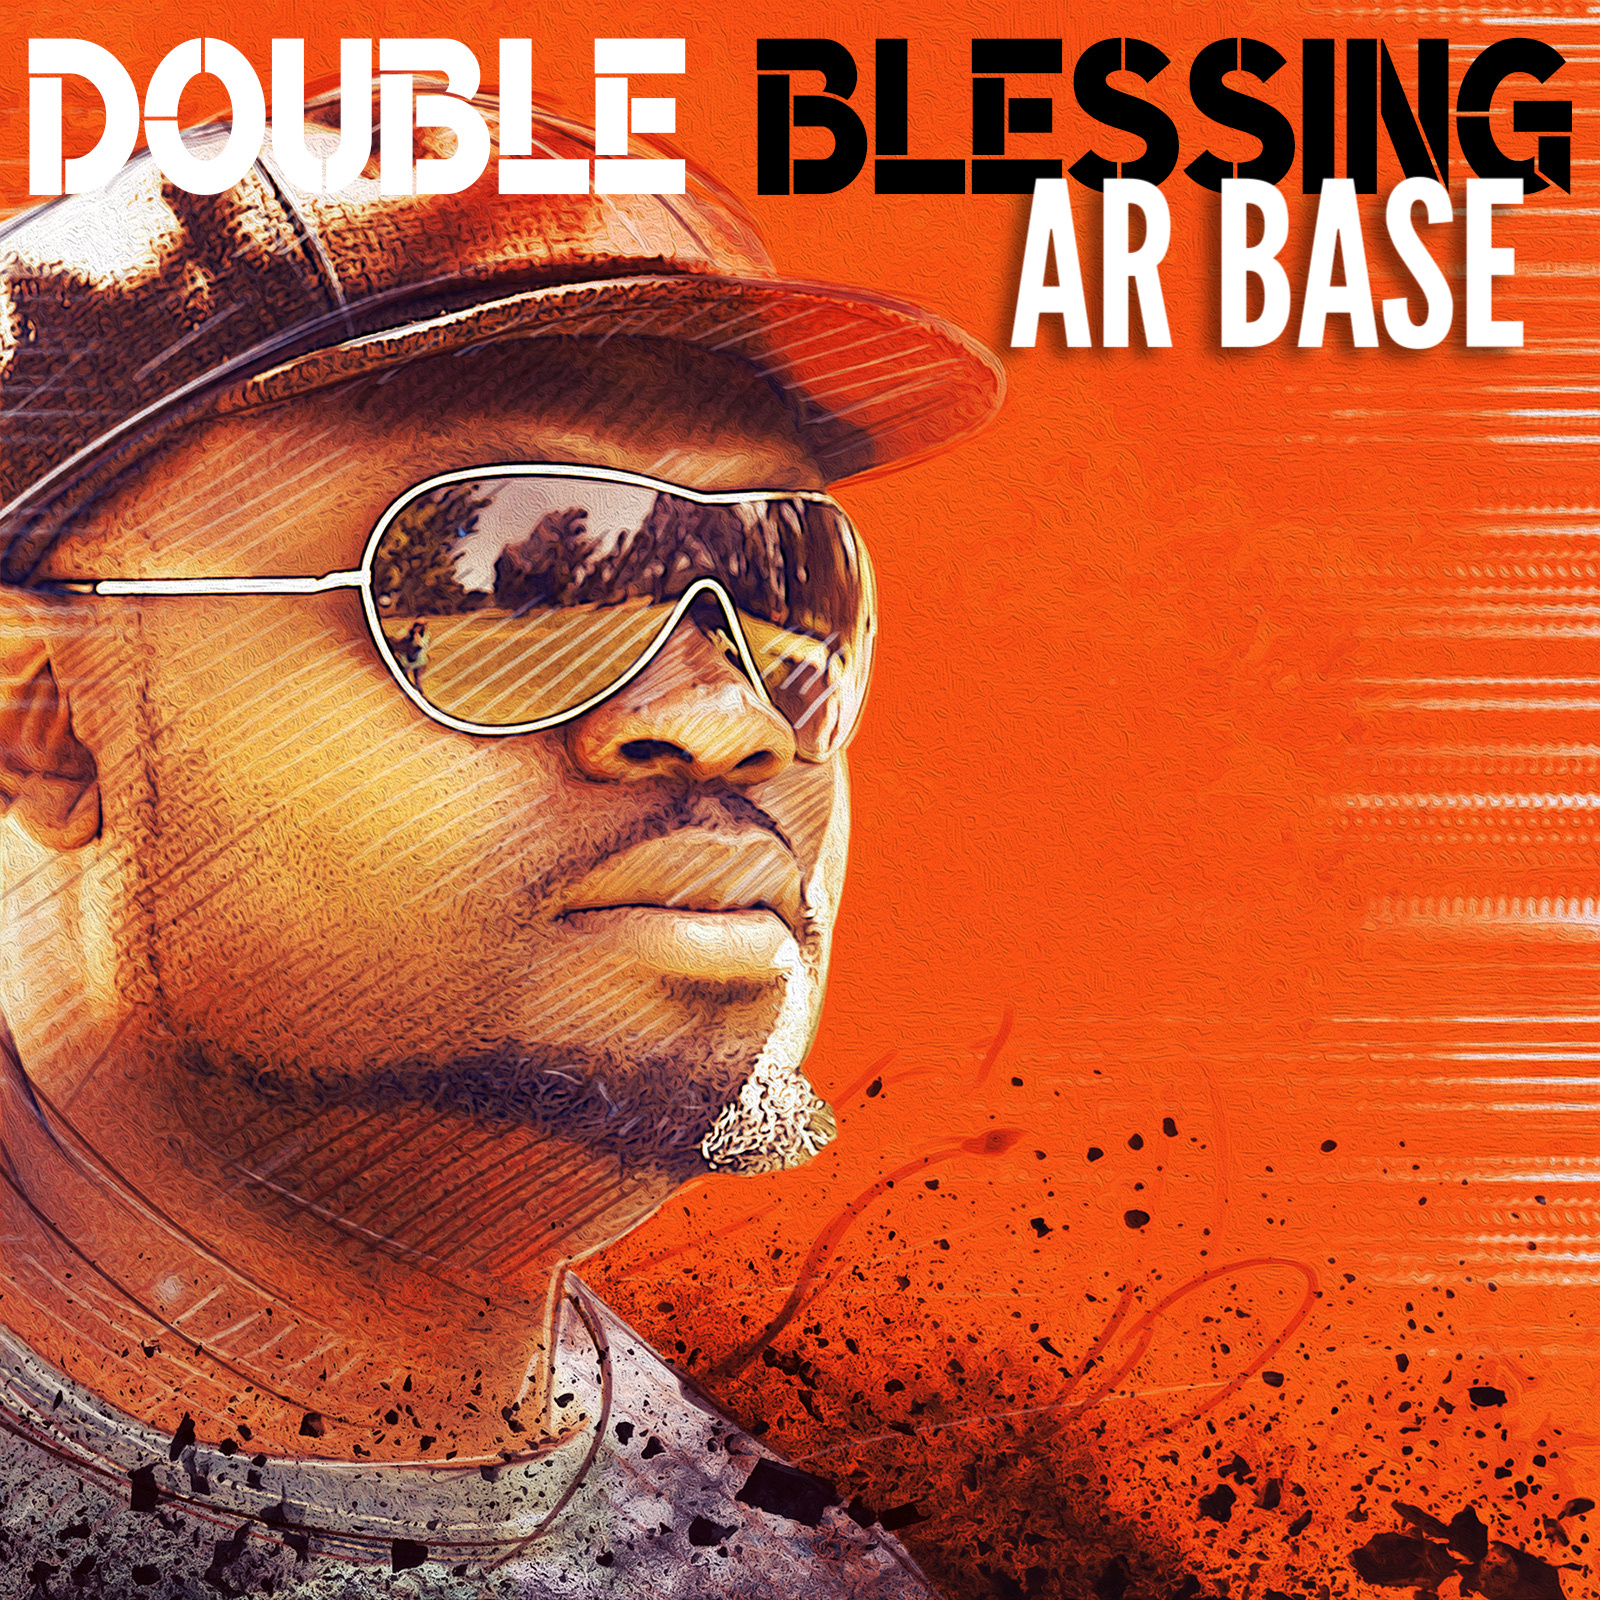 AR Base Enlivens Souls With “Double Blessing”